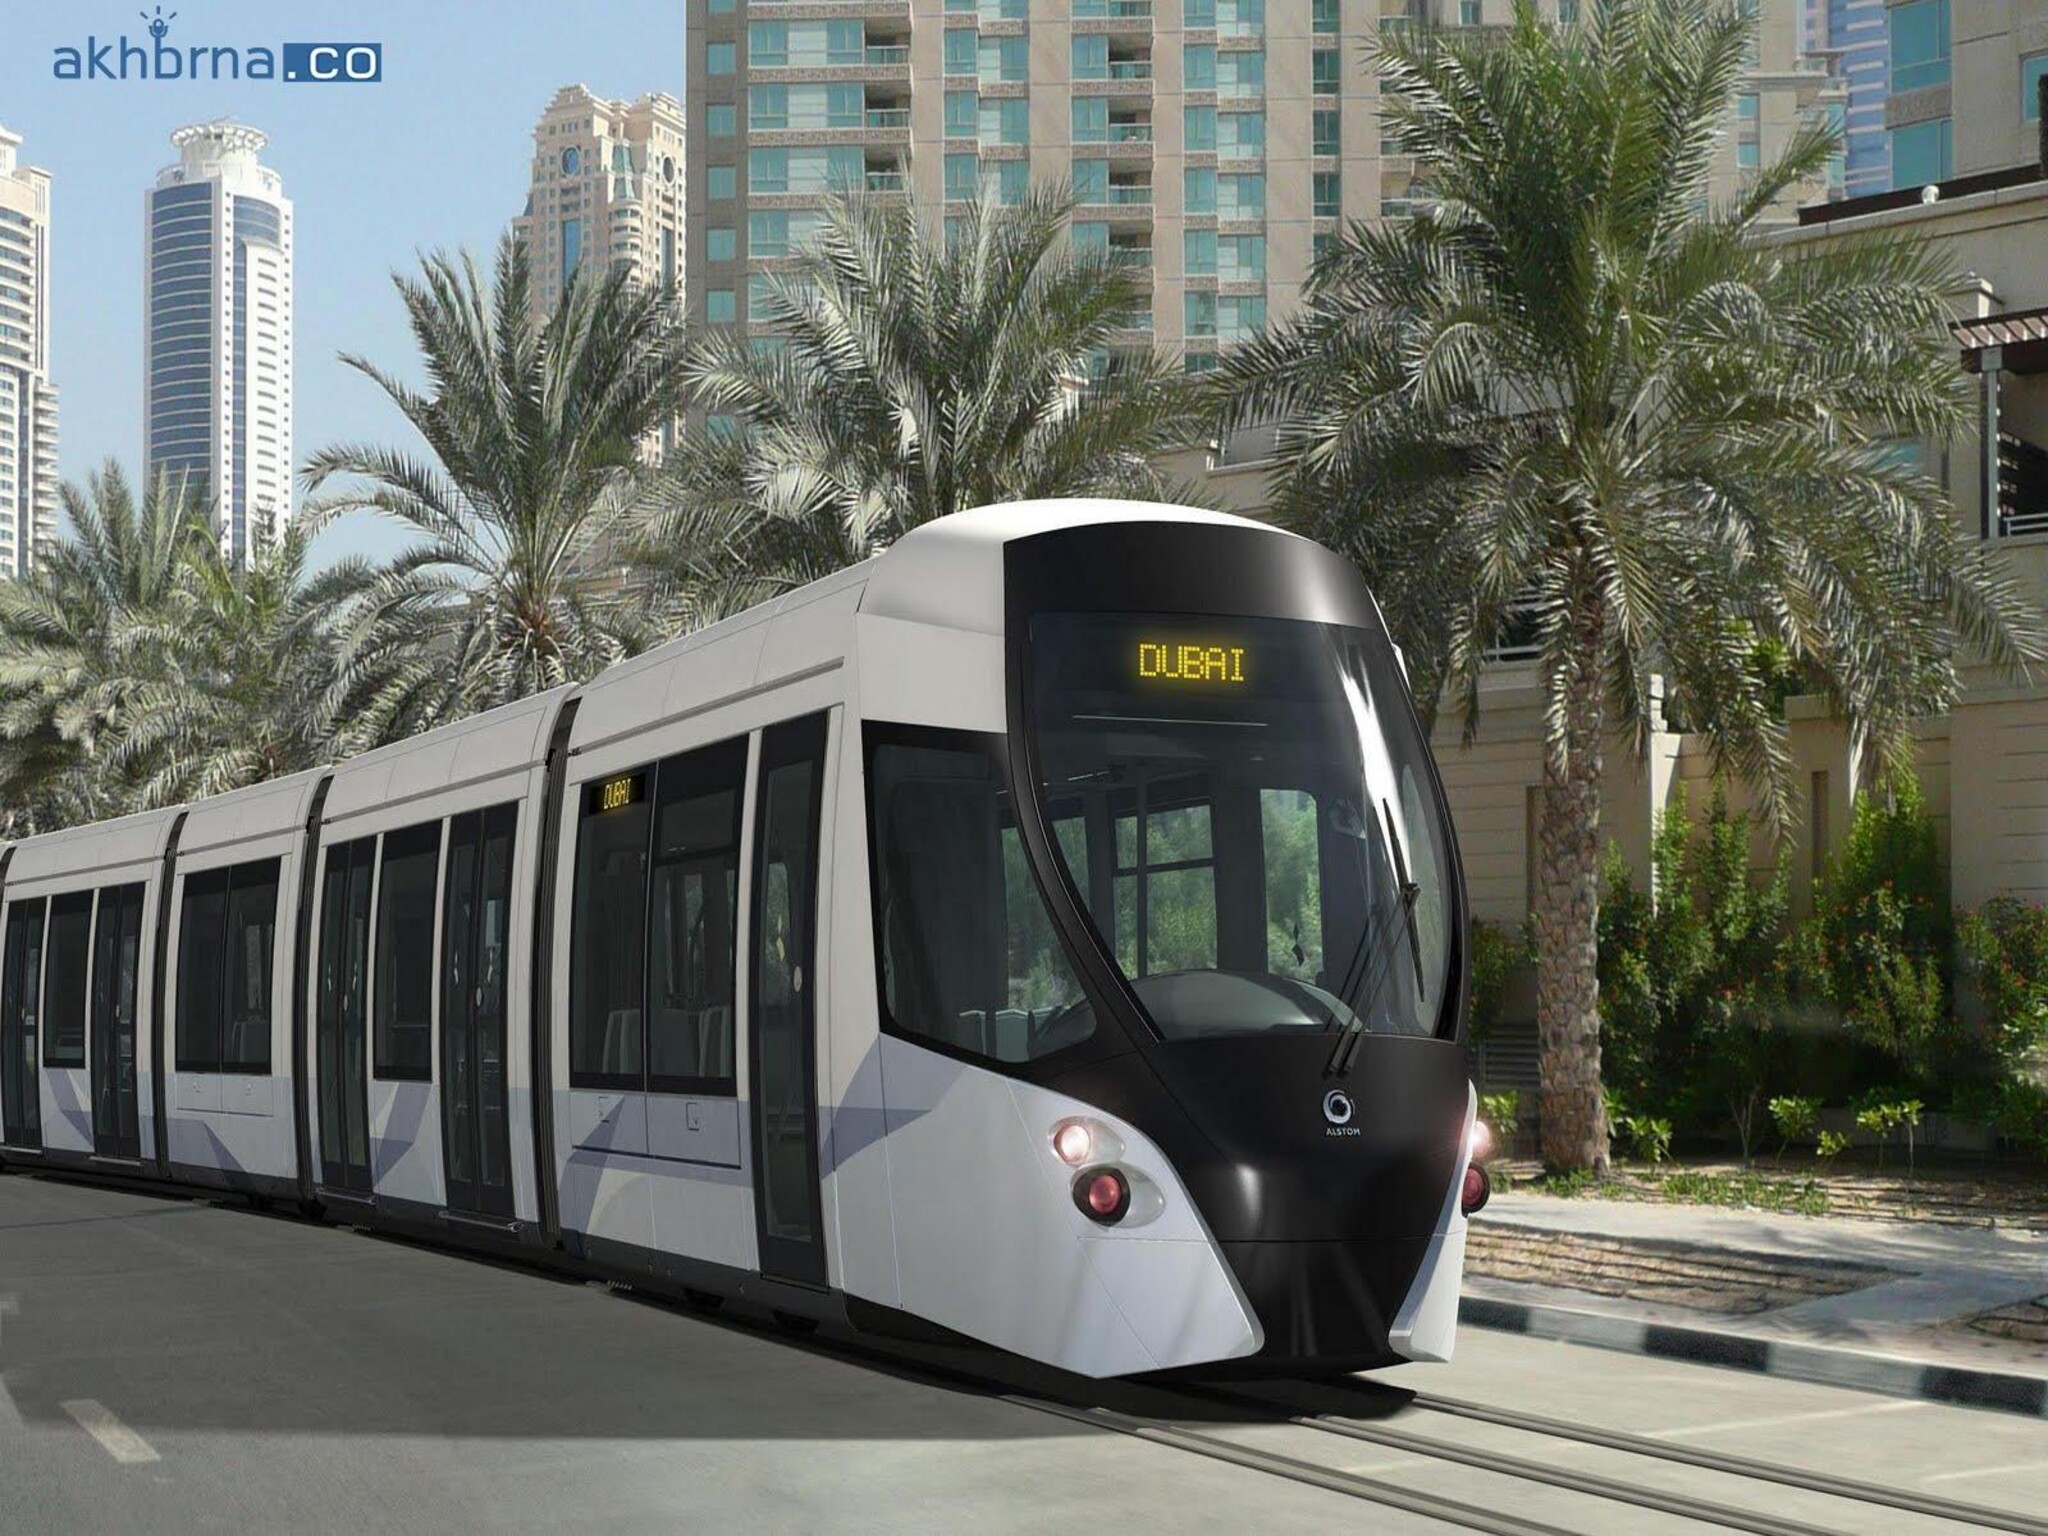 UAE Roads Department Issues an Important Notice for Dubai Tram Users